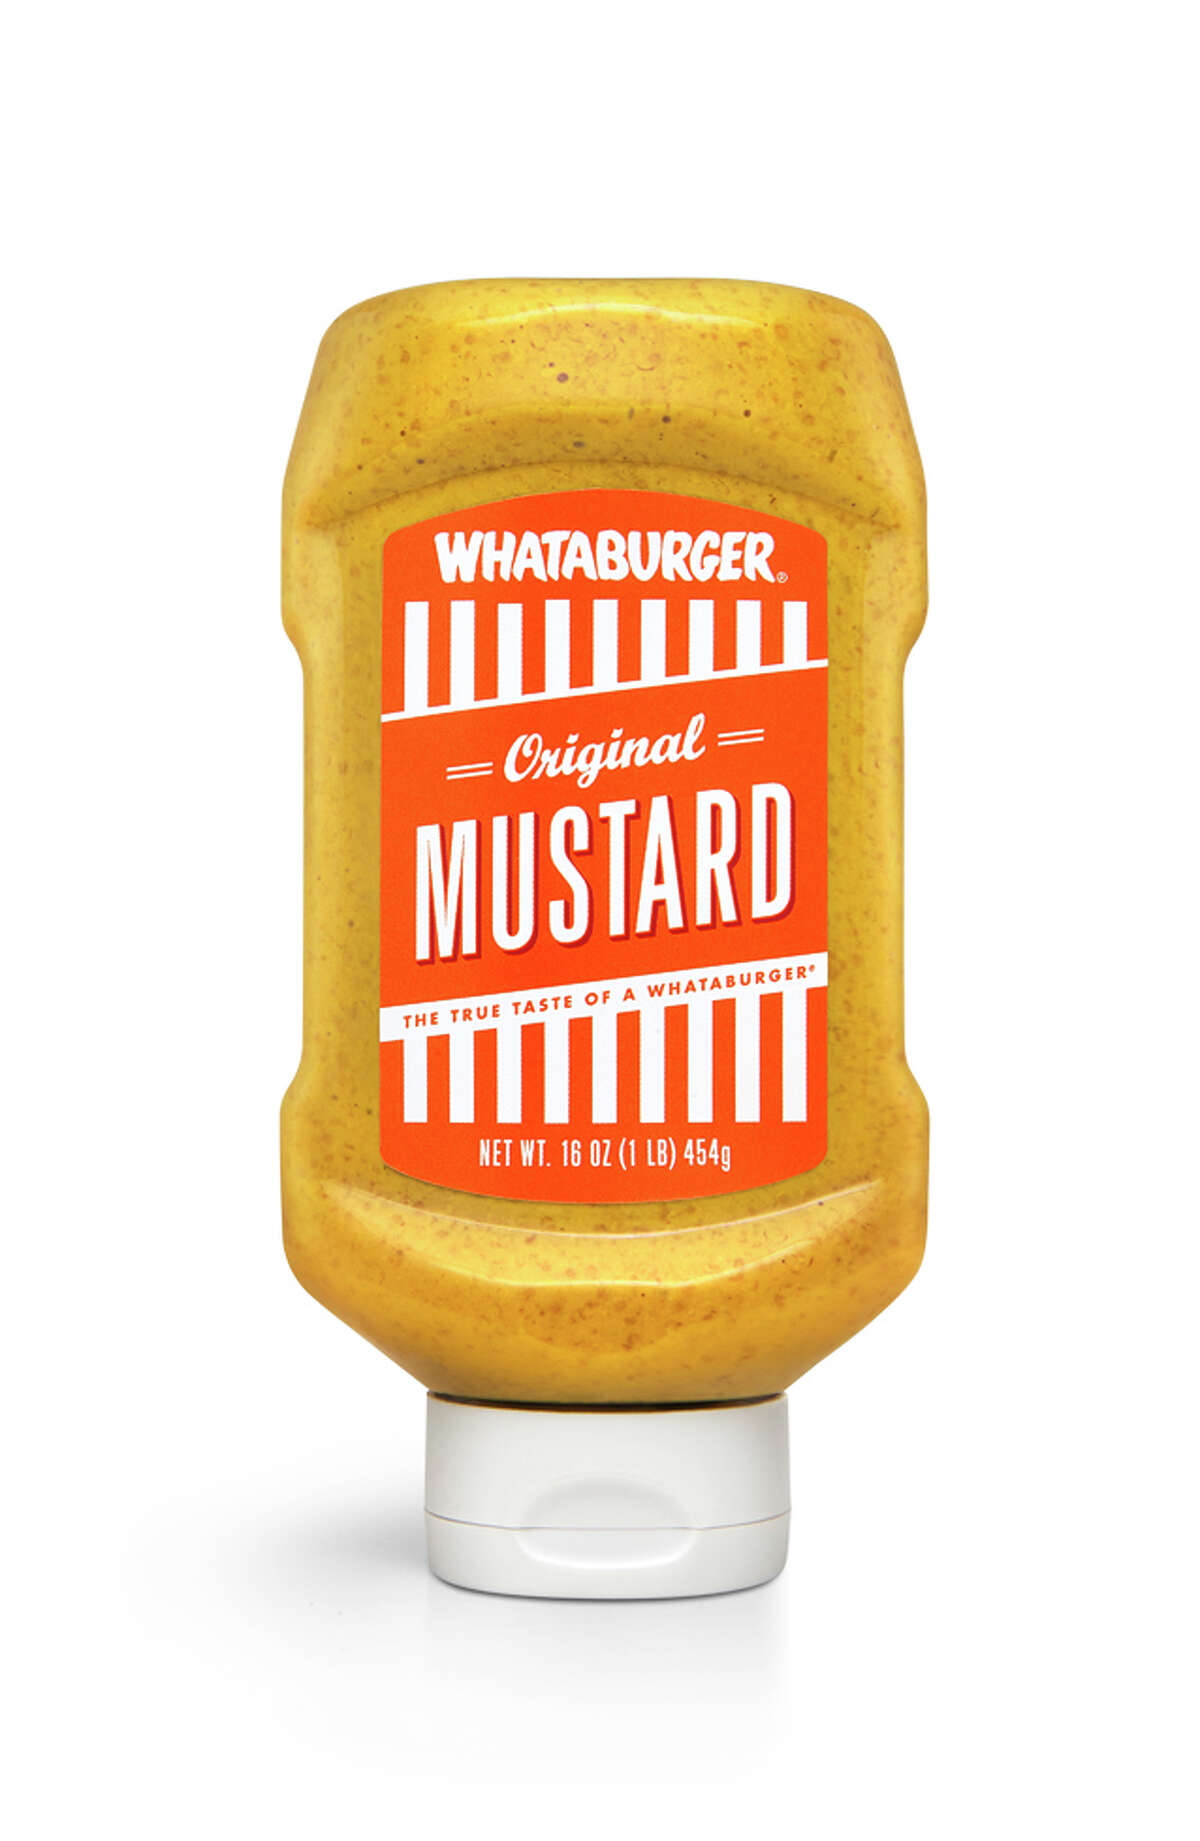 Whataburger will launch into retail sales for the first time by bottling its popular line of condiments Fancy Ketchup, Spicy Ketchup and Original Mustard making them available exclusively at all Texas and Mexico H-E-B stores this summer. Shows in the picture is Whataburger Original Mustard.